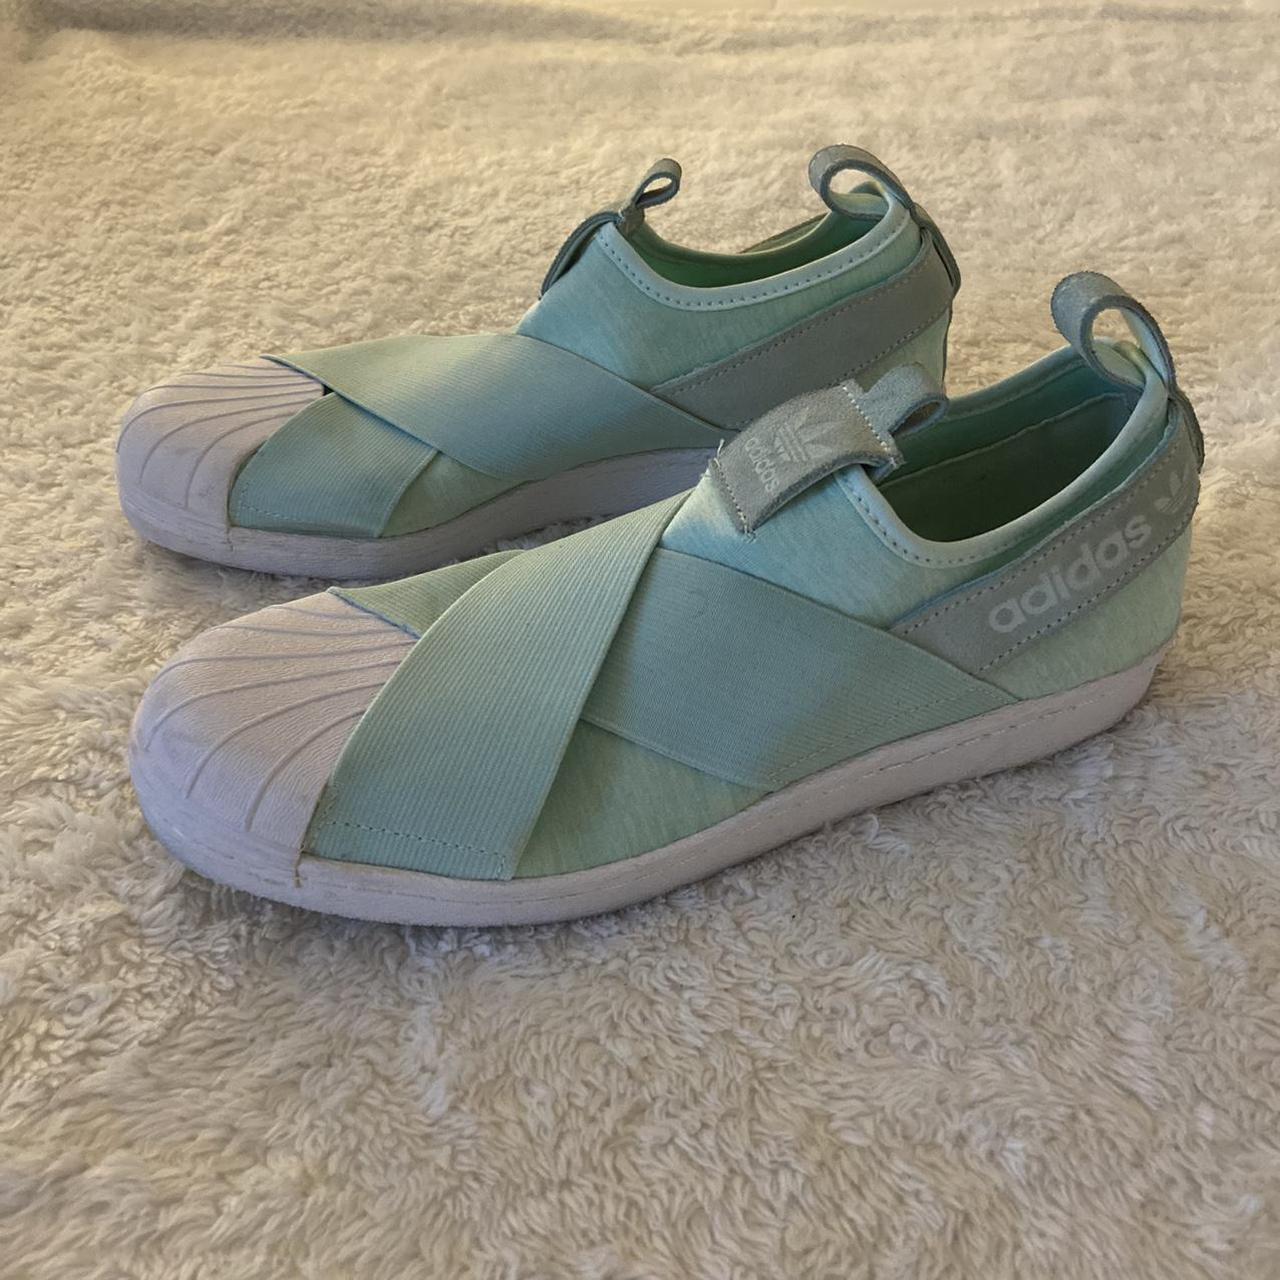 Product Image 3 - Turquoise Adidas Sneaker Shoes

Size 8